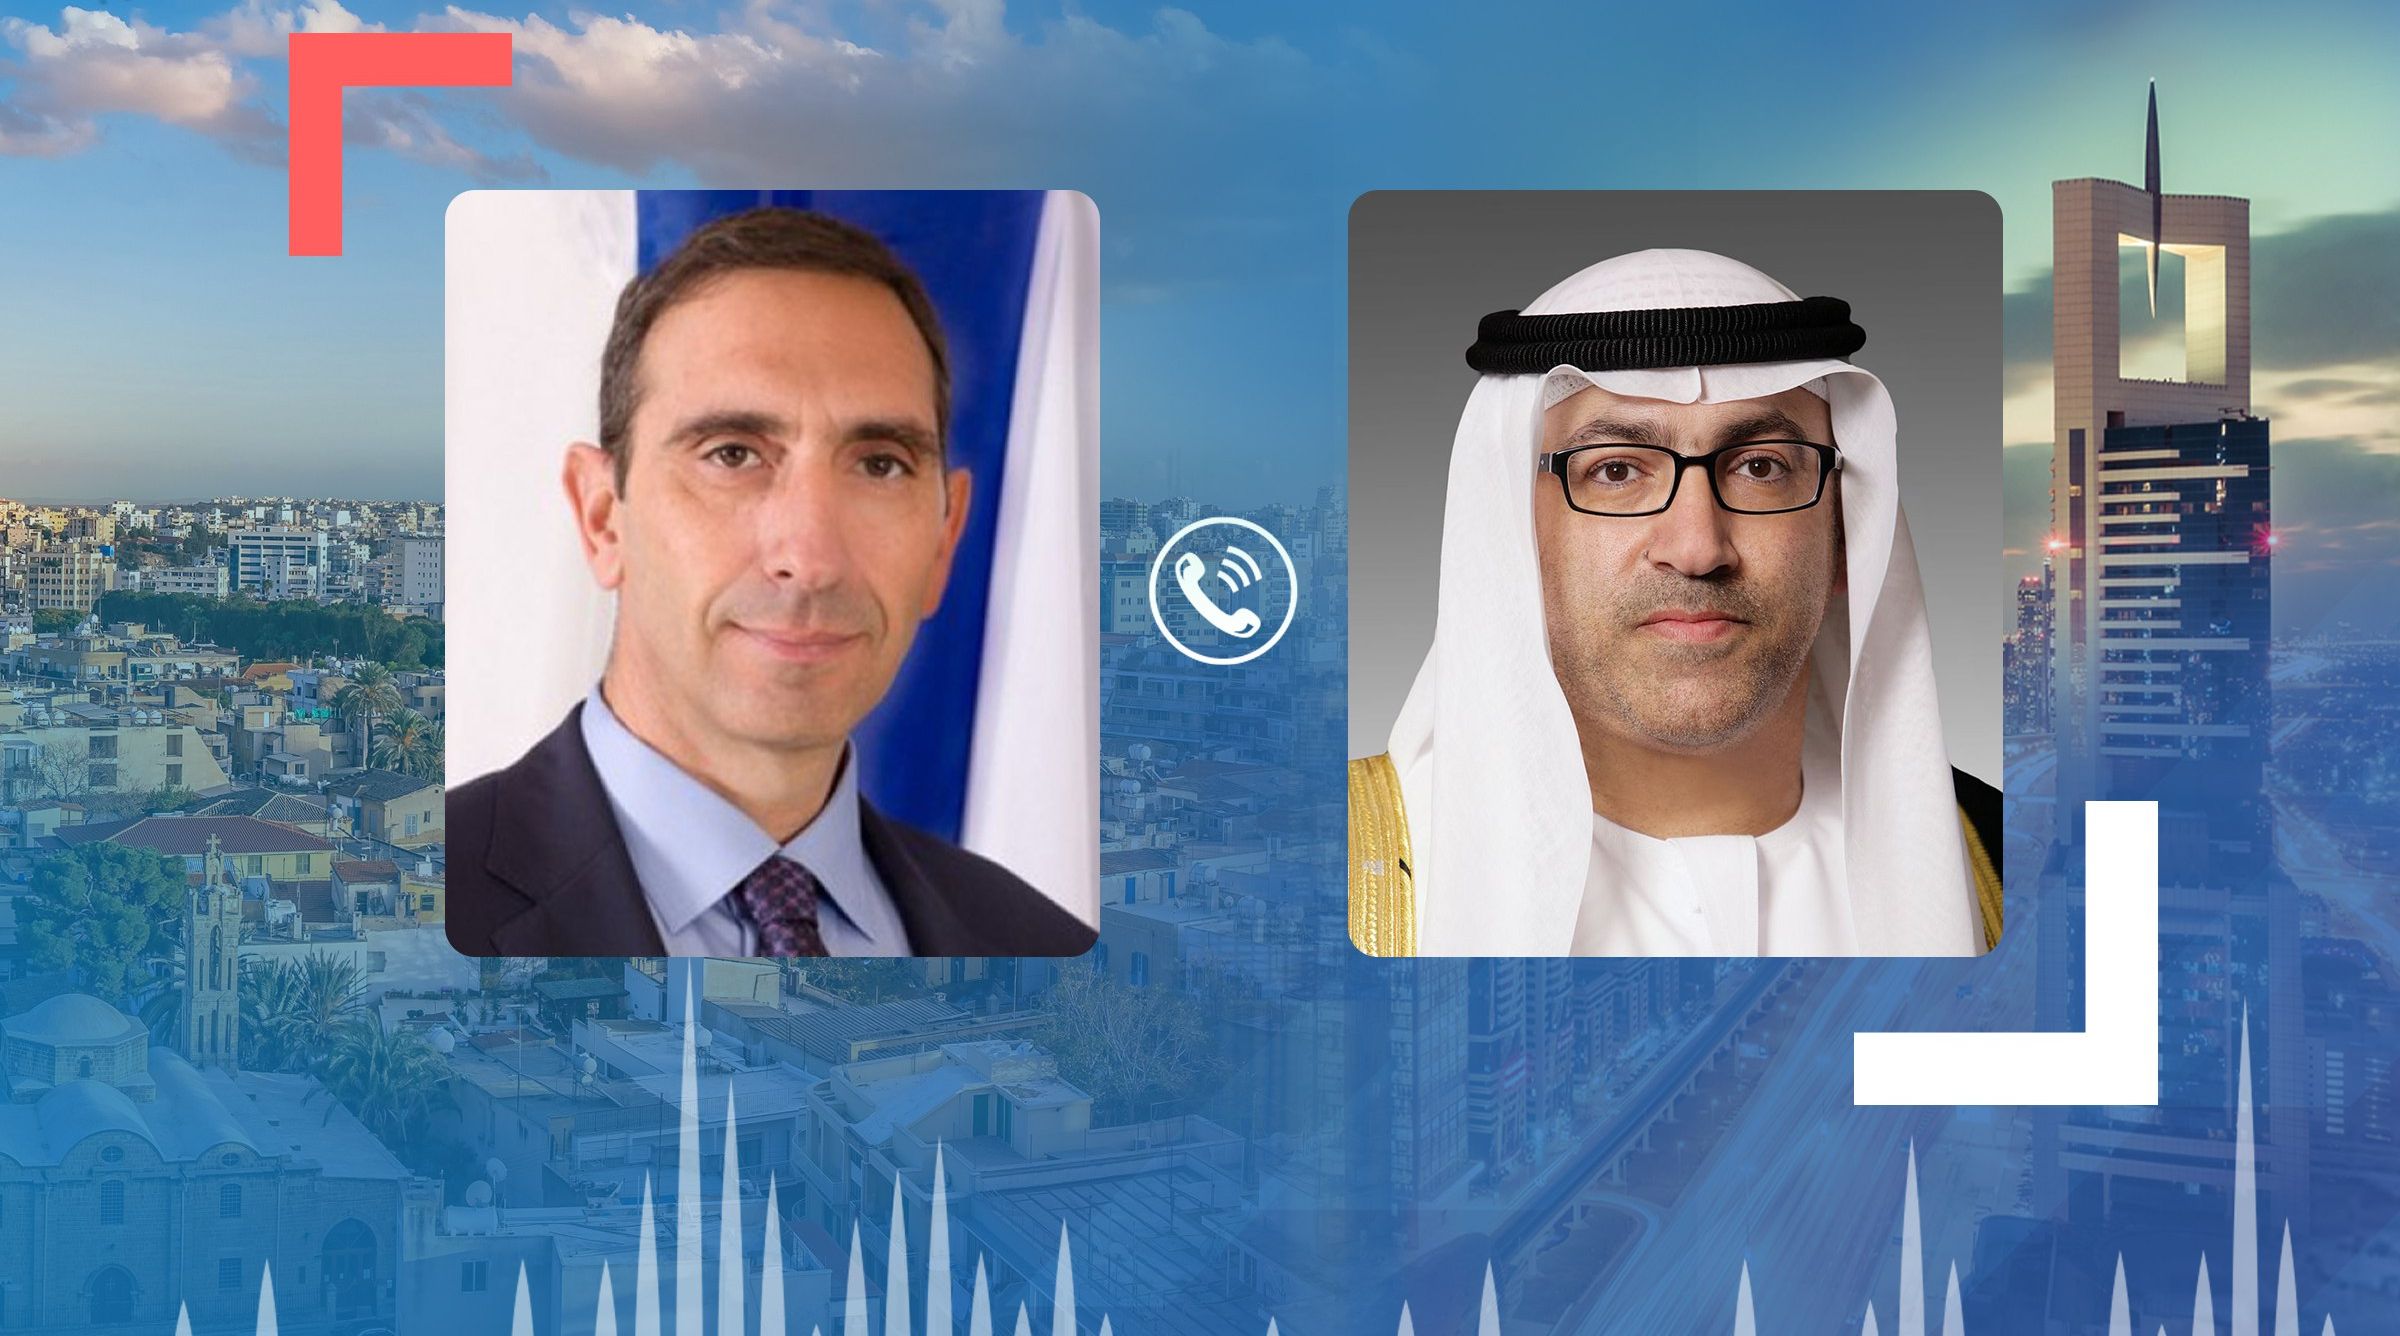 "Health Ministers of UAE, Cyprus discuss cooperation "